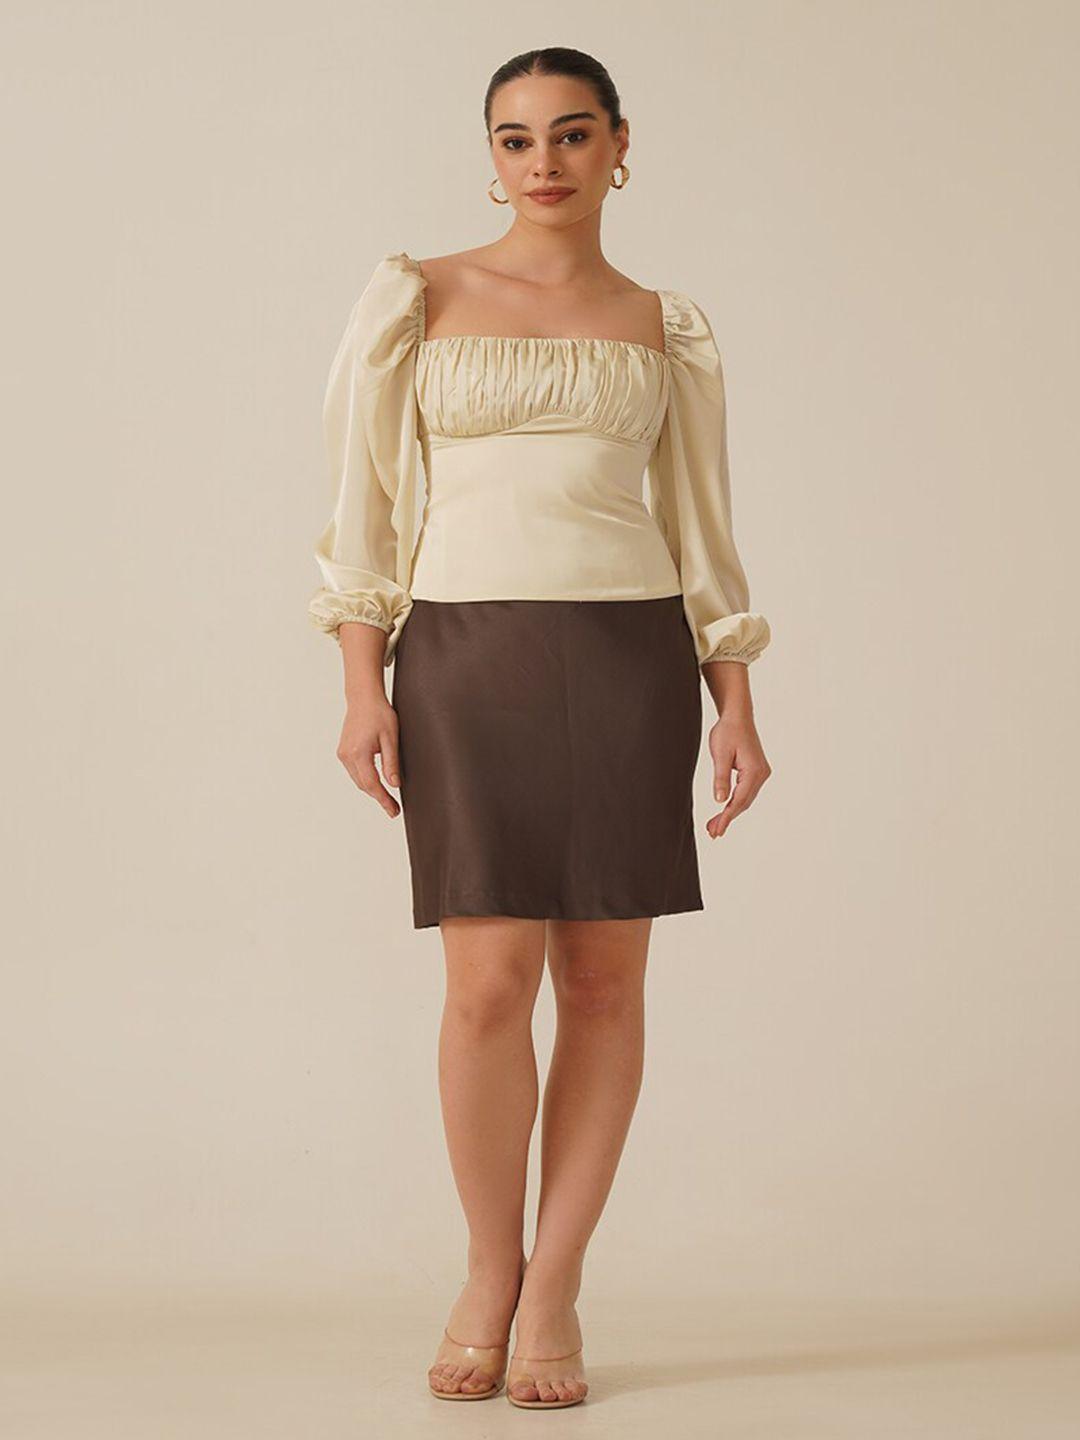 ipso facto square neck puff sleeves pleated satin top